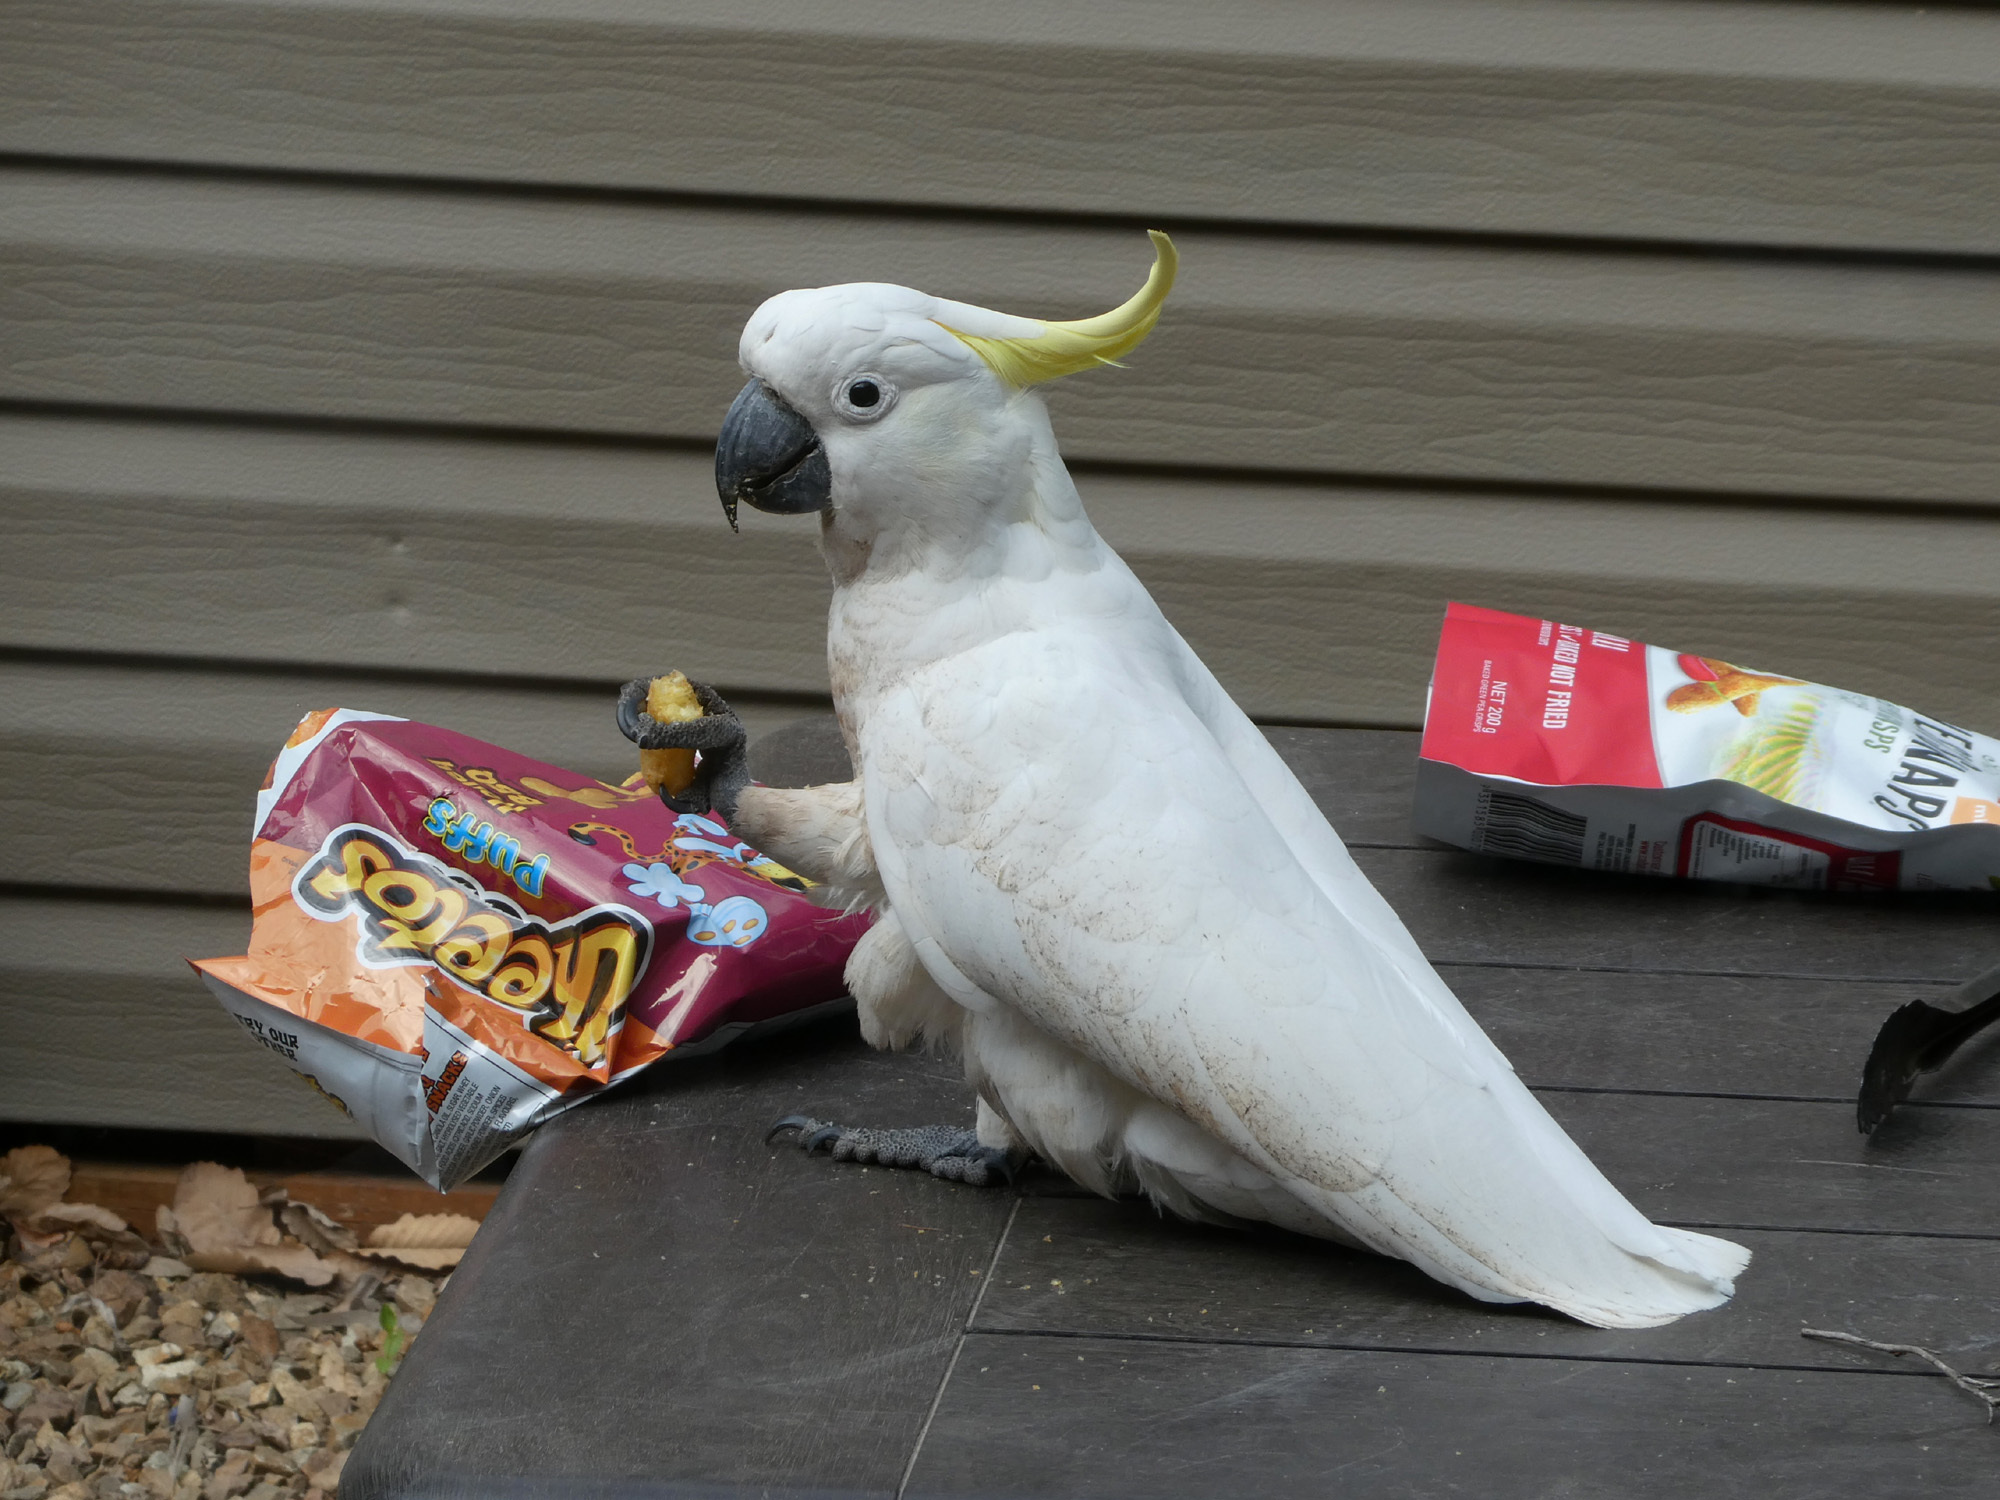 A Sulphur-crested Cockatoo sits on a picnic table next to an open bag of Cheetos, clutching one partially-eaten cheese puff between its toes.